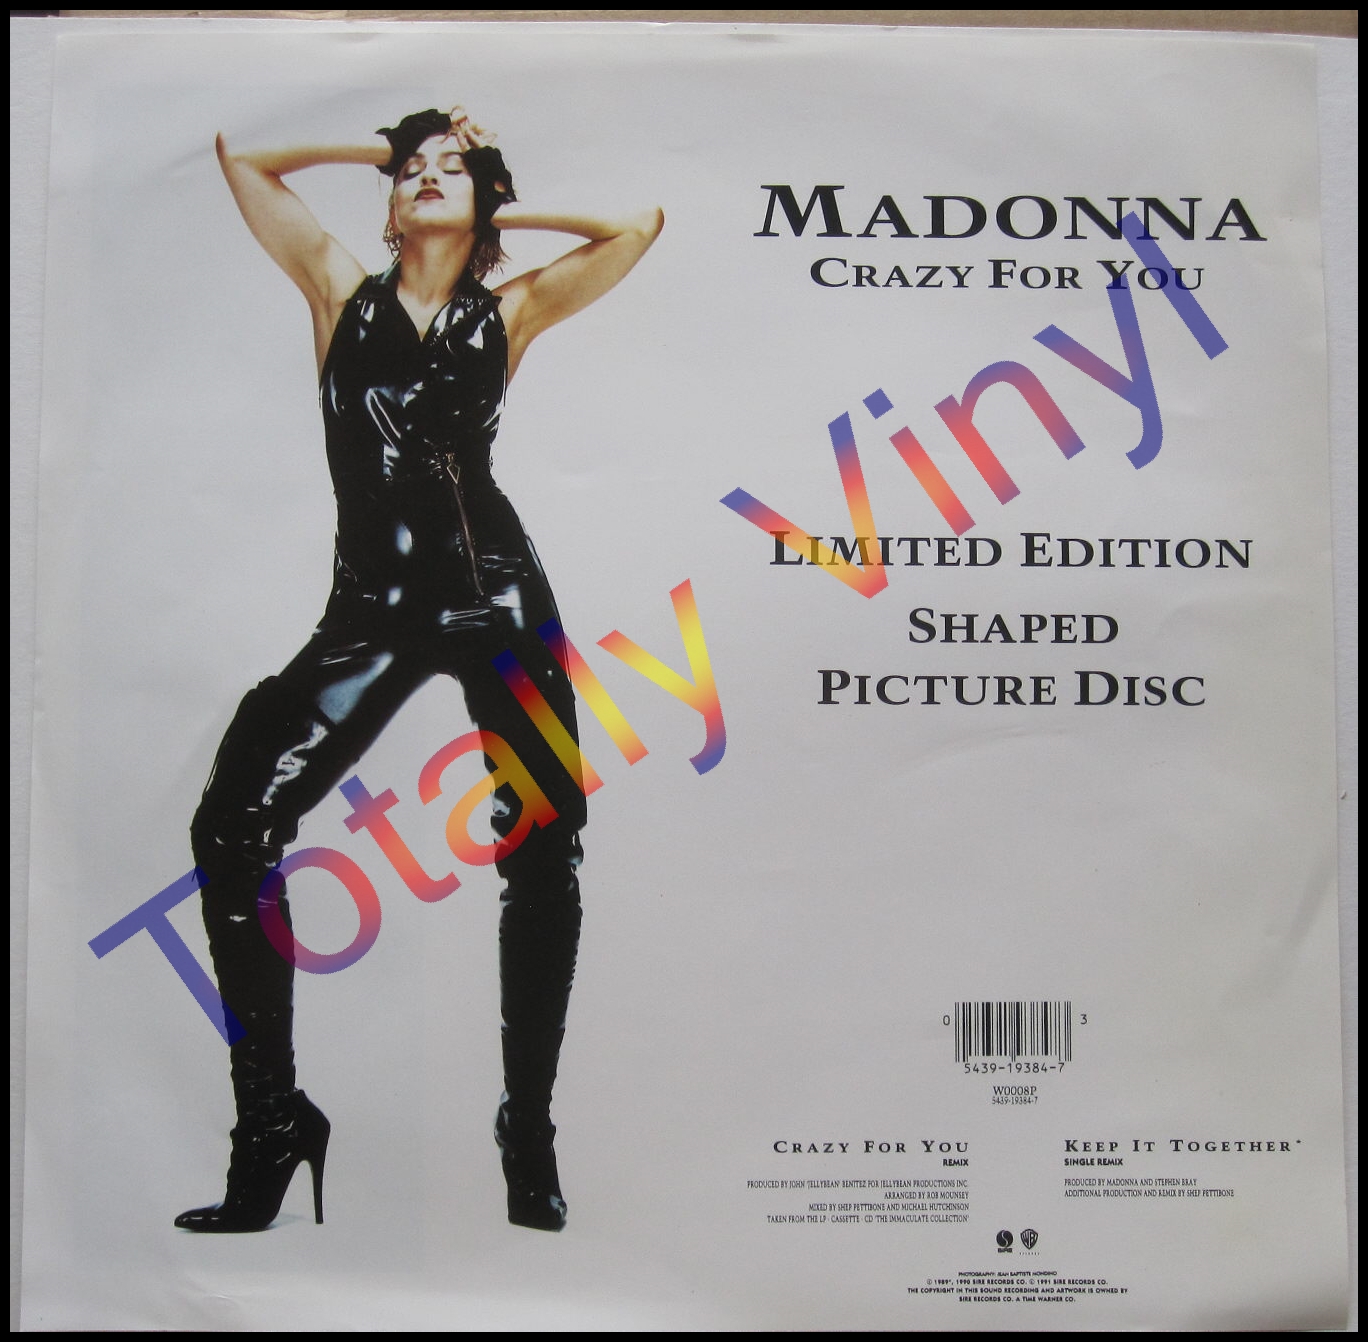 Totally Vinyl Records || Madonna - Crazy for you (remix) / Keep it